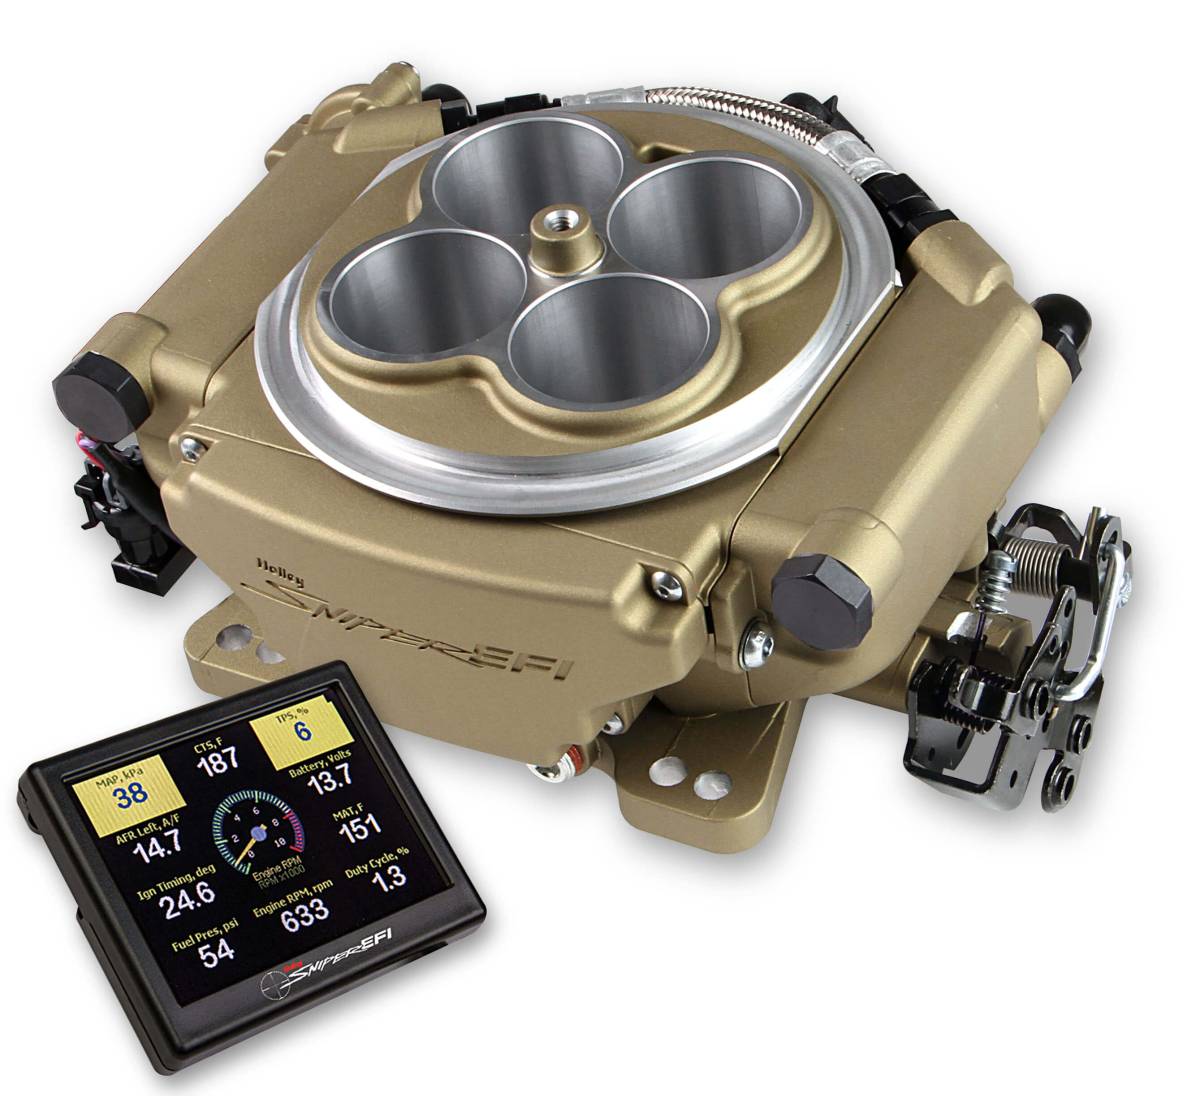 Holley - Holley Super Sniper EFI 4150 Self-Tuning Fuel Injection Kit 650 HP - Classic Gold - Image 1